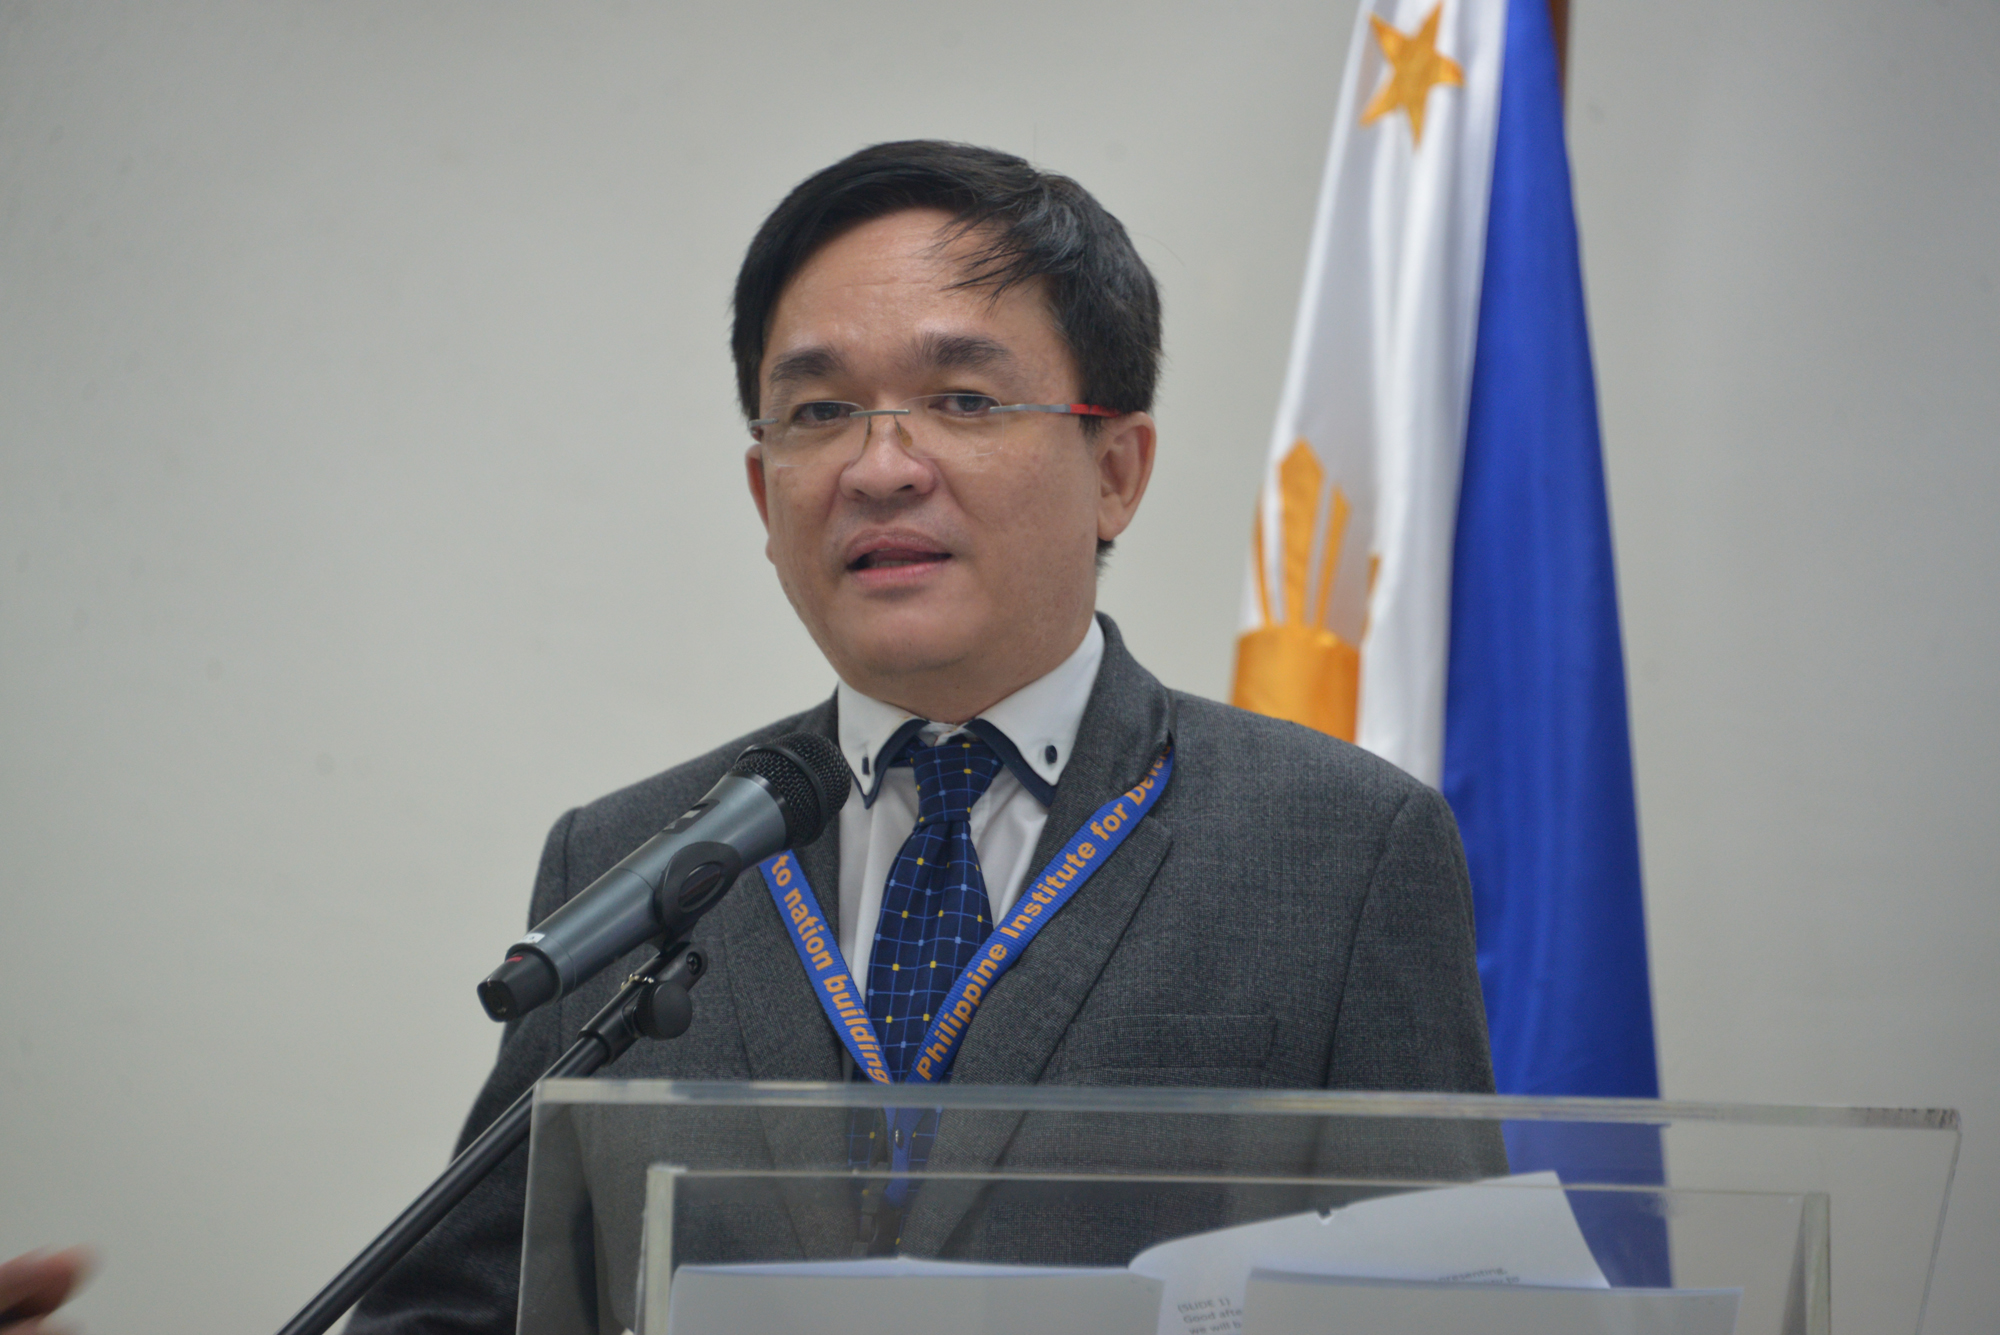 Public Seminar on Poverty and Child Stunting-pids-poverty-3-20190725.jpg